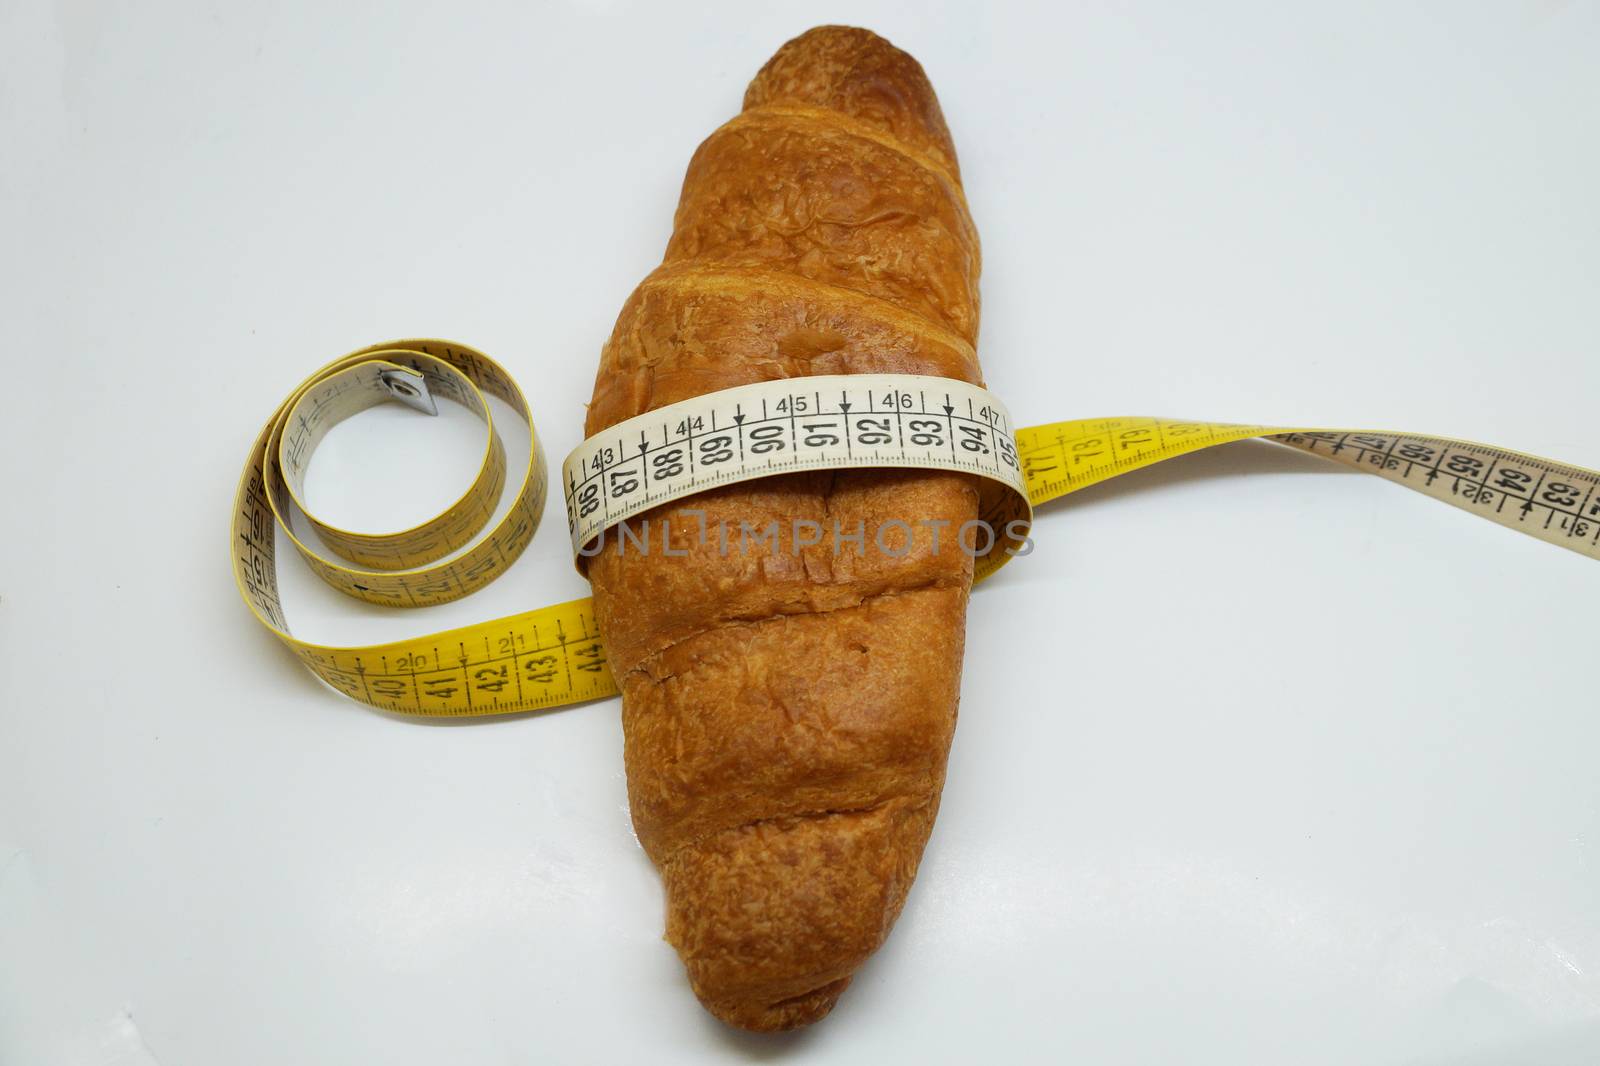 soft measuring ruler wrapped around a croissant as a symbol of unhealthy nutrition by Annado